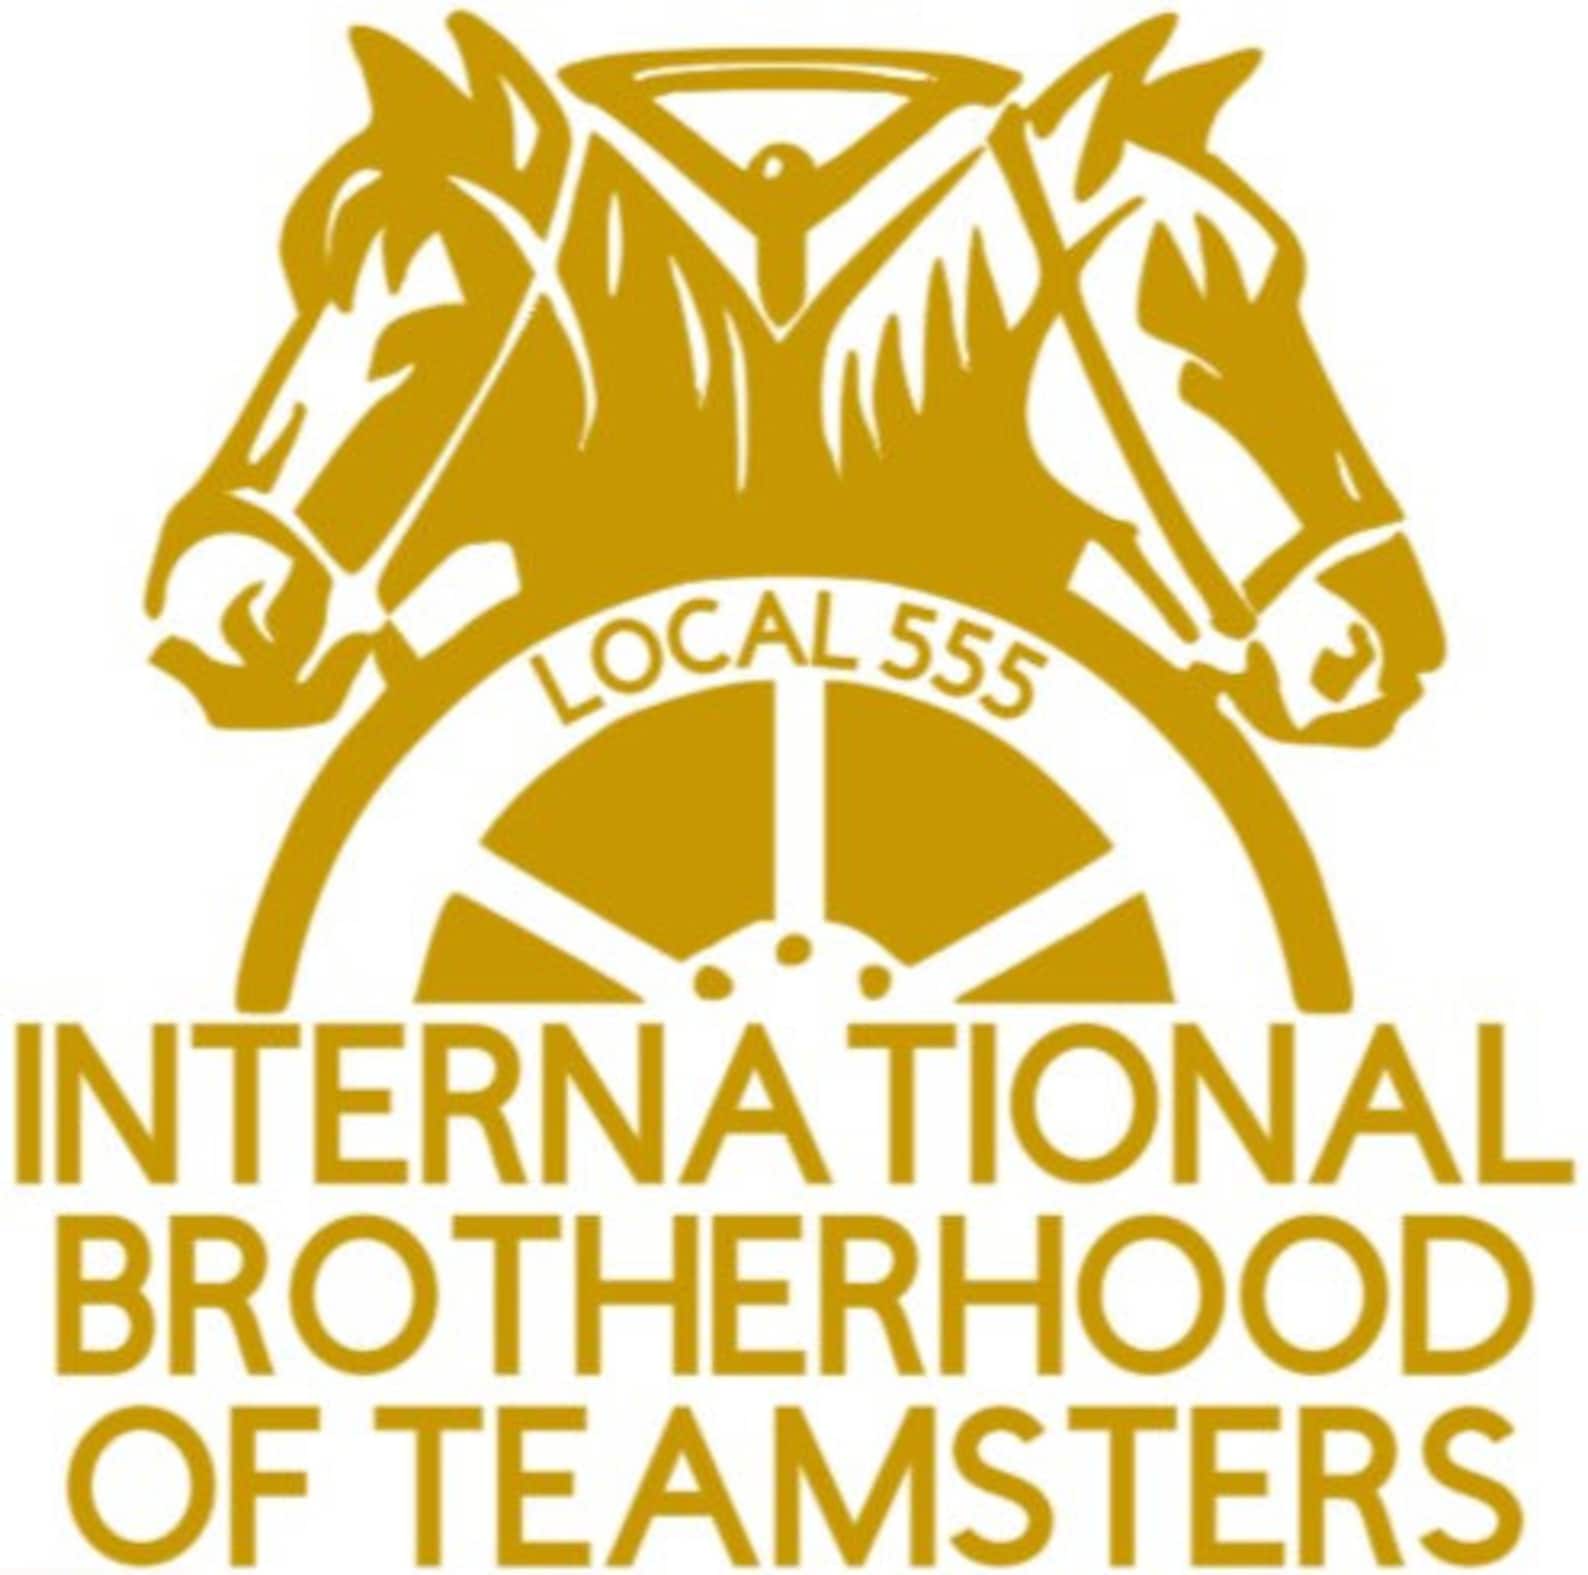 Teamsters Personalized (A) Die-cut Vinyl Decal / Sticker ** 4 Sizes **